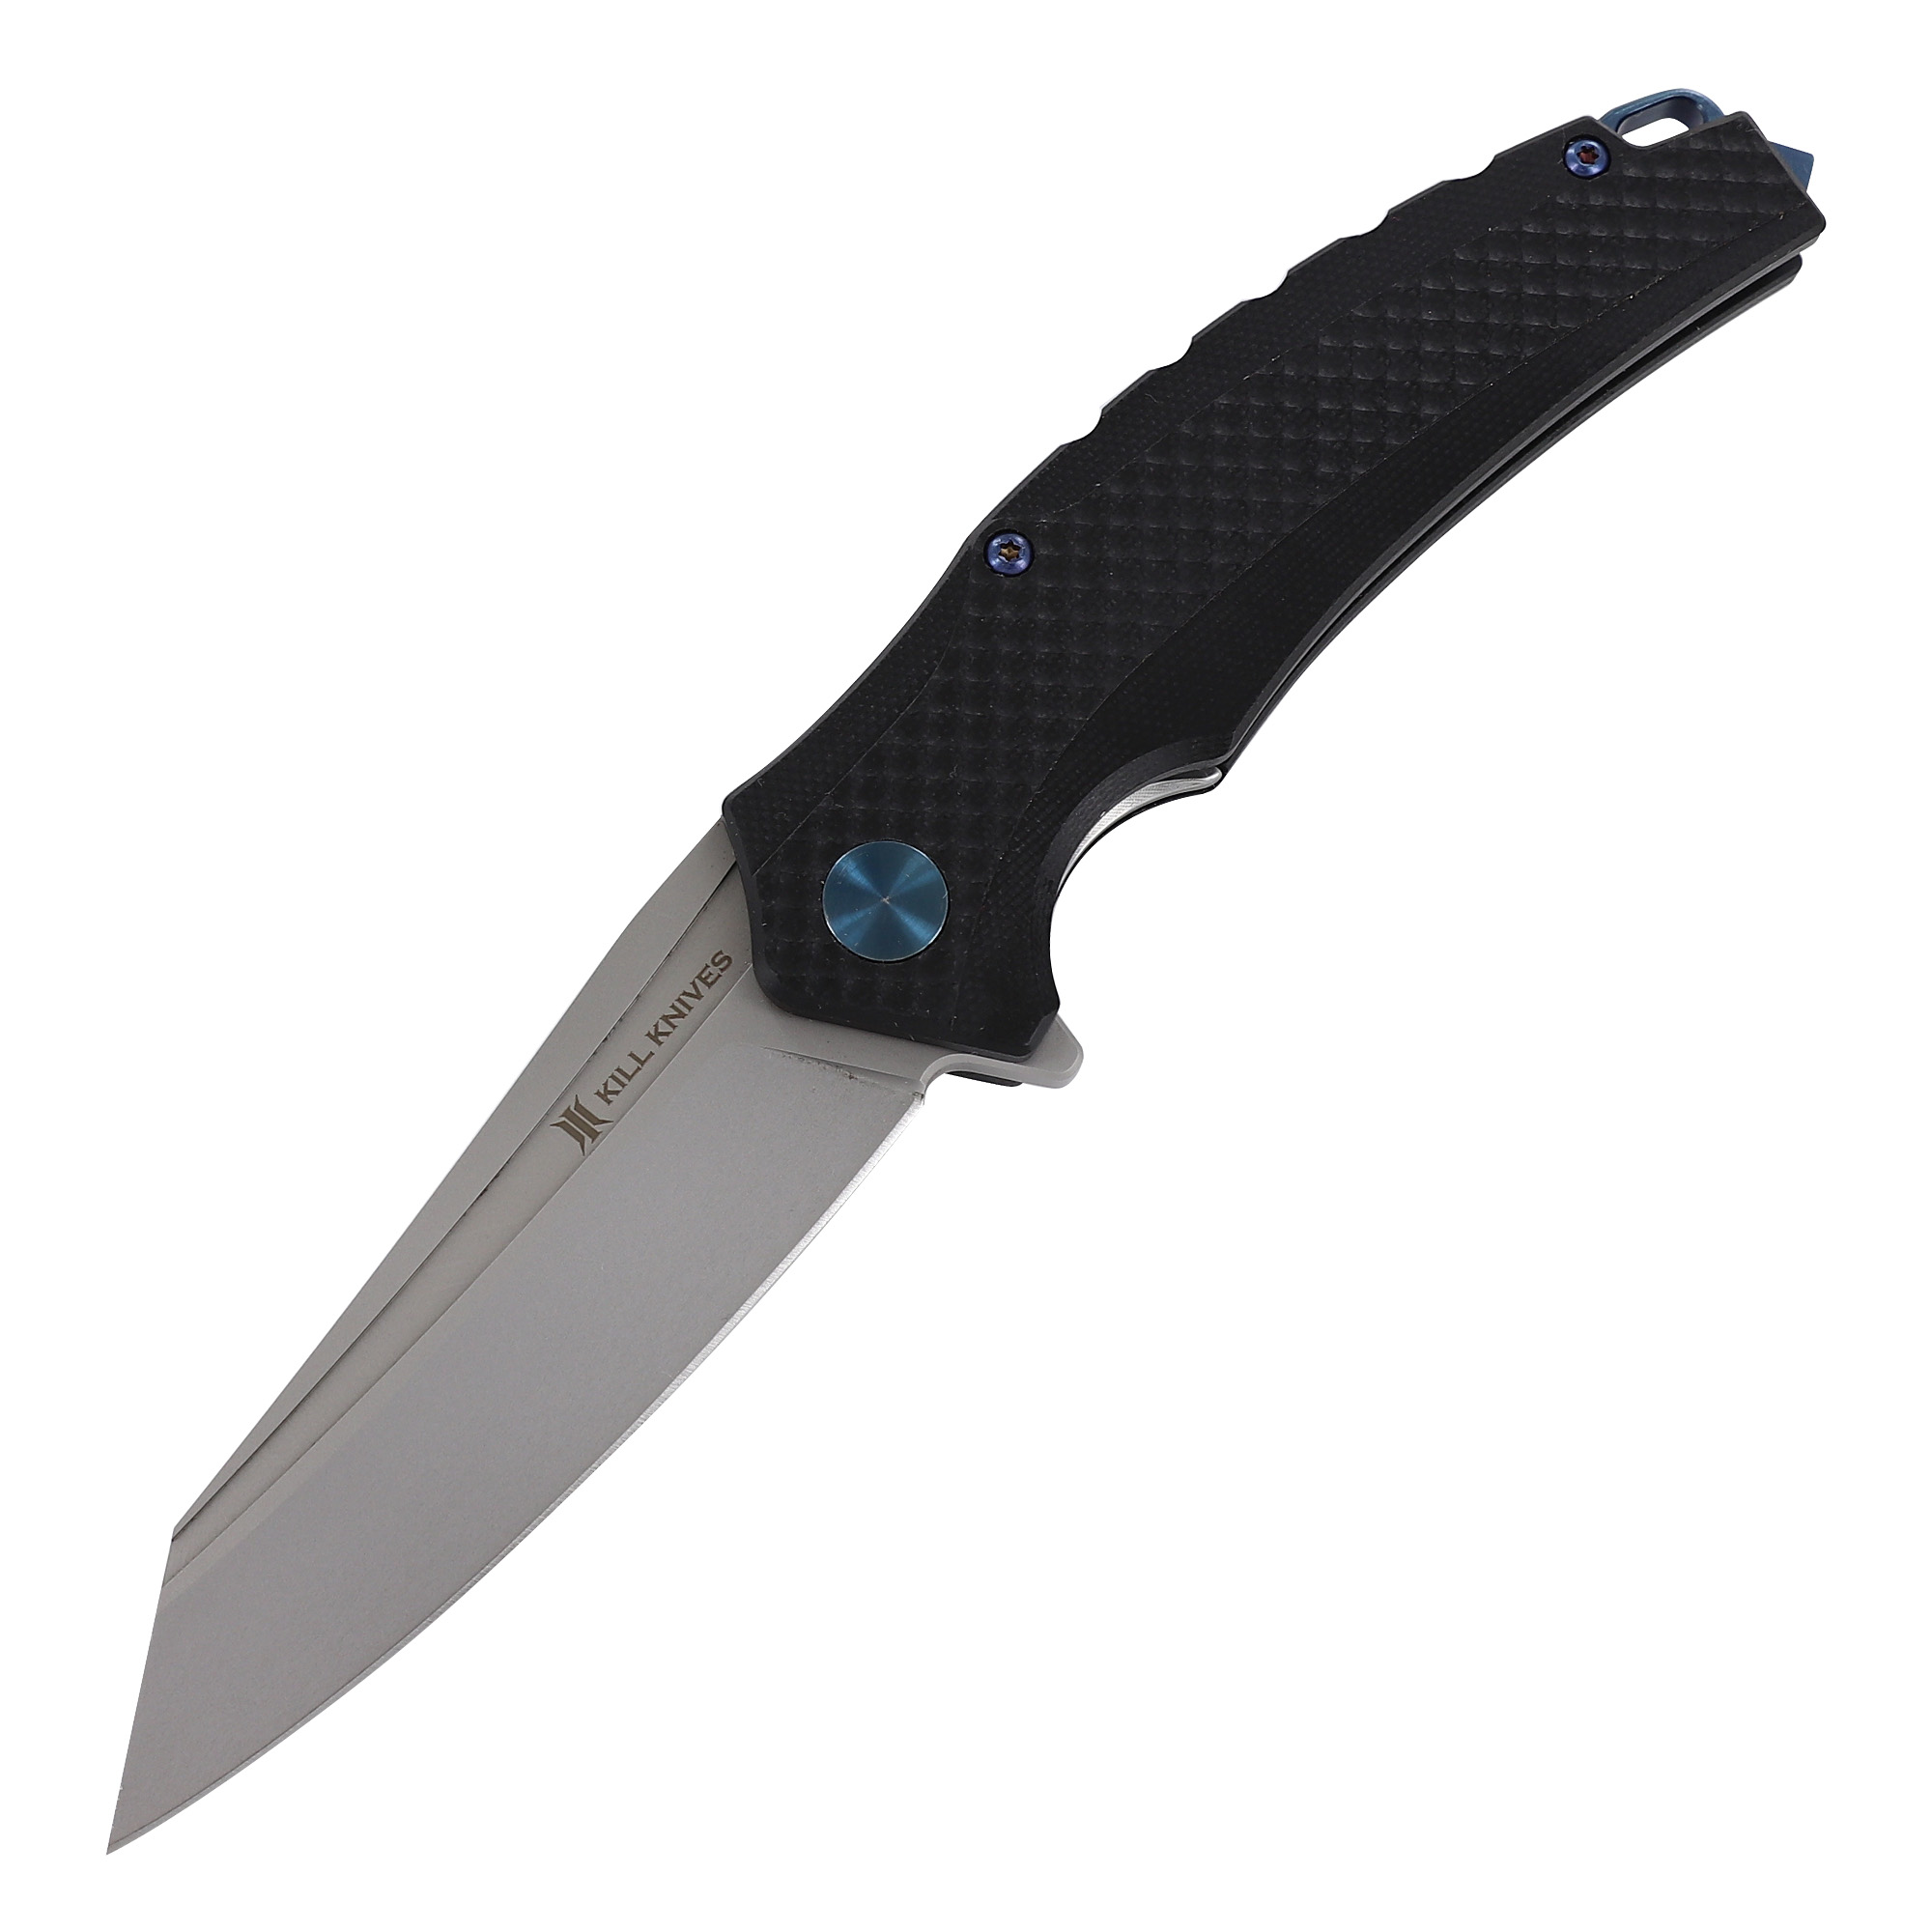 KILL KNIVES? Tranquilize Ball Bearing Spring Assisted D2 Blade G10 Handle Pocket KNIFE